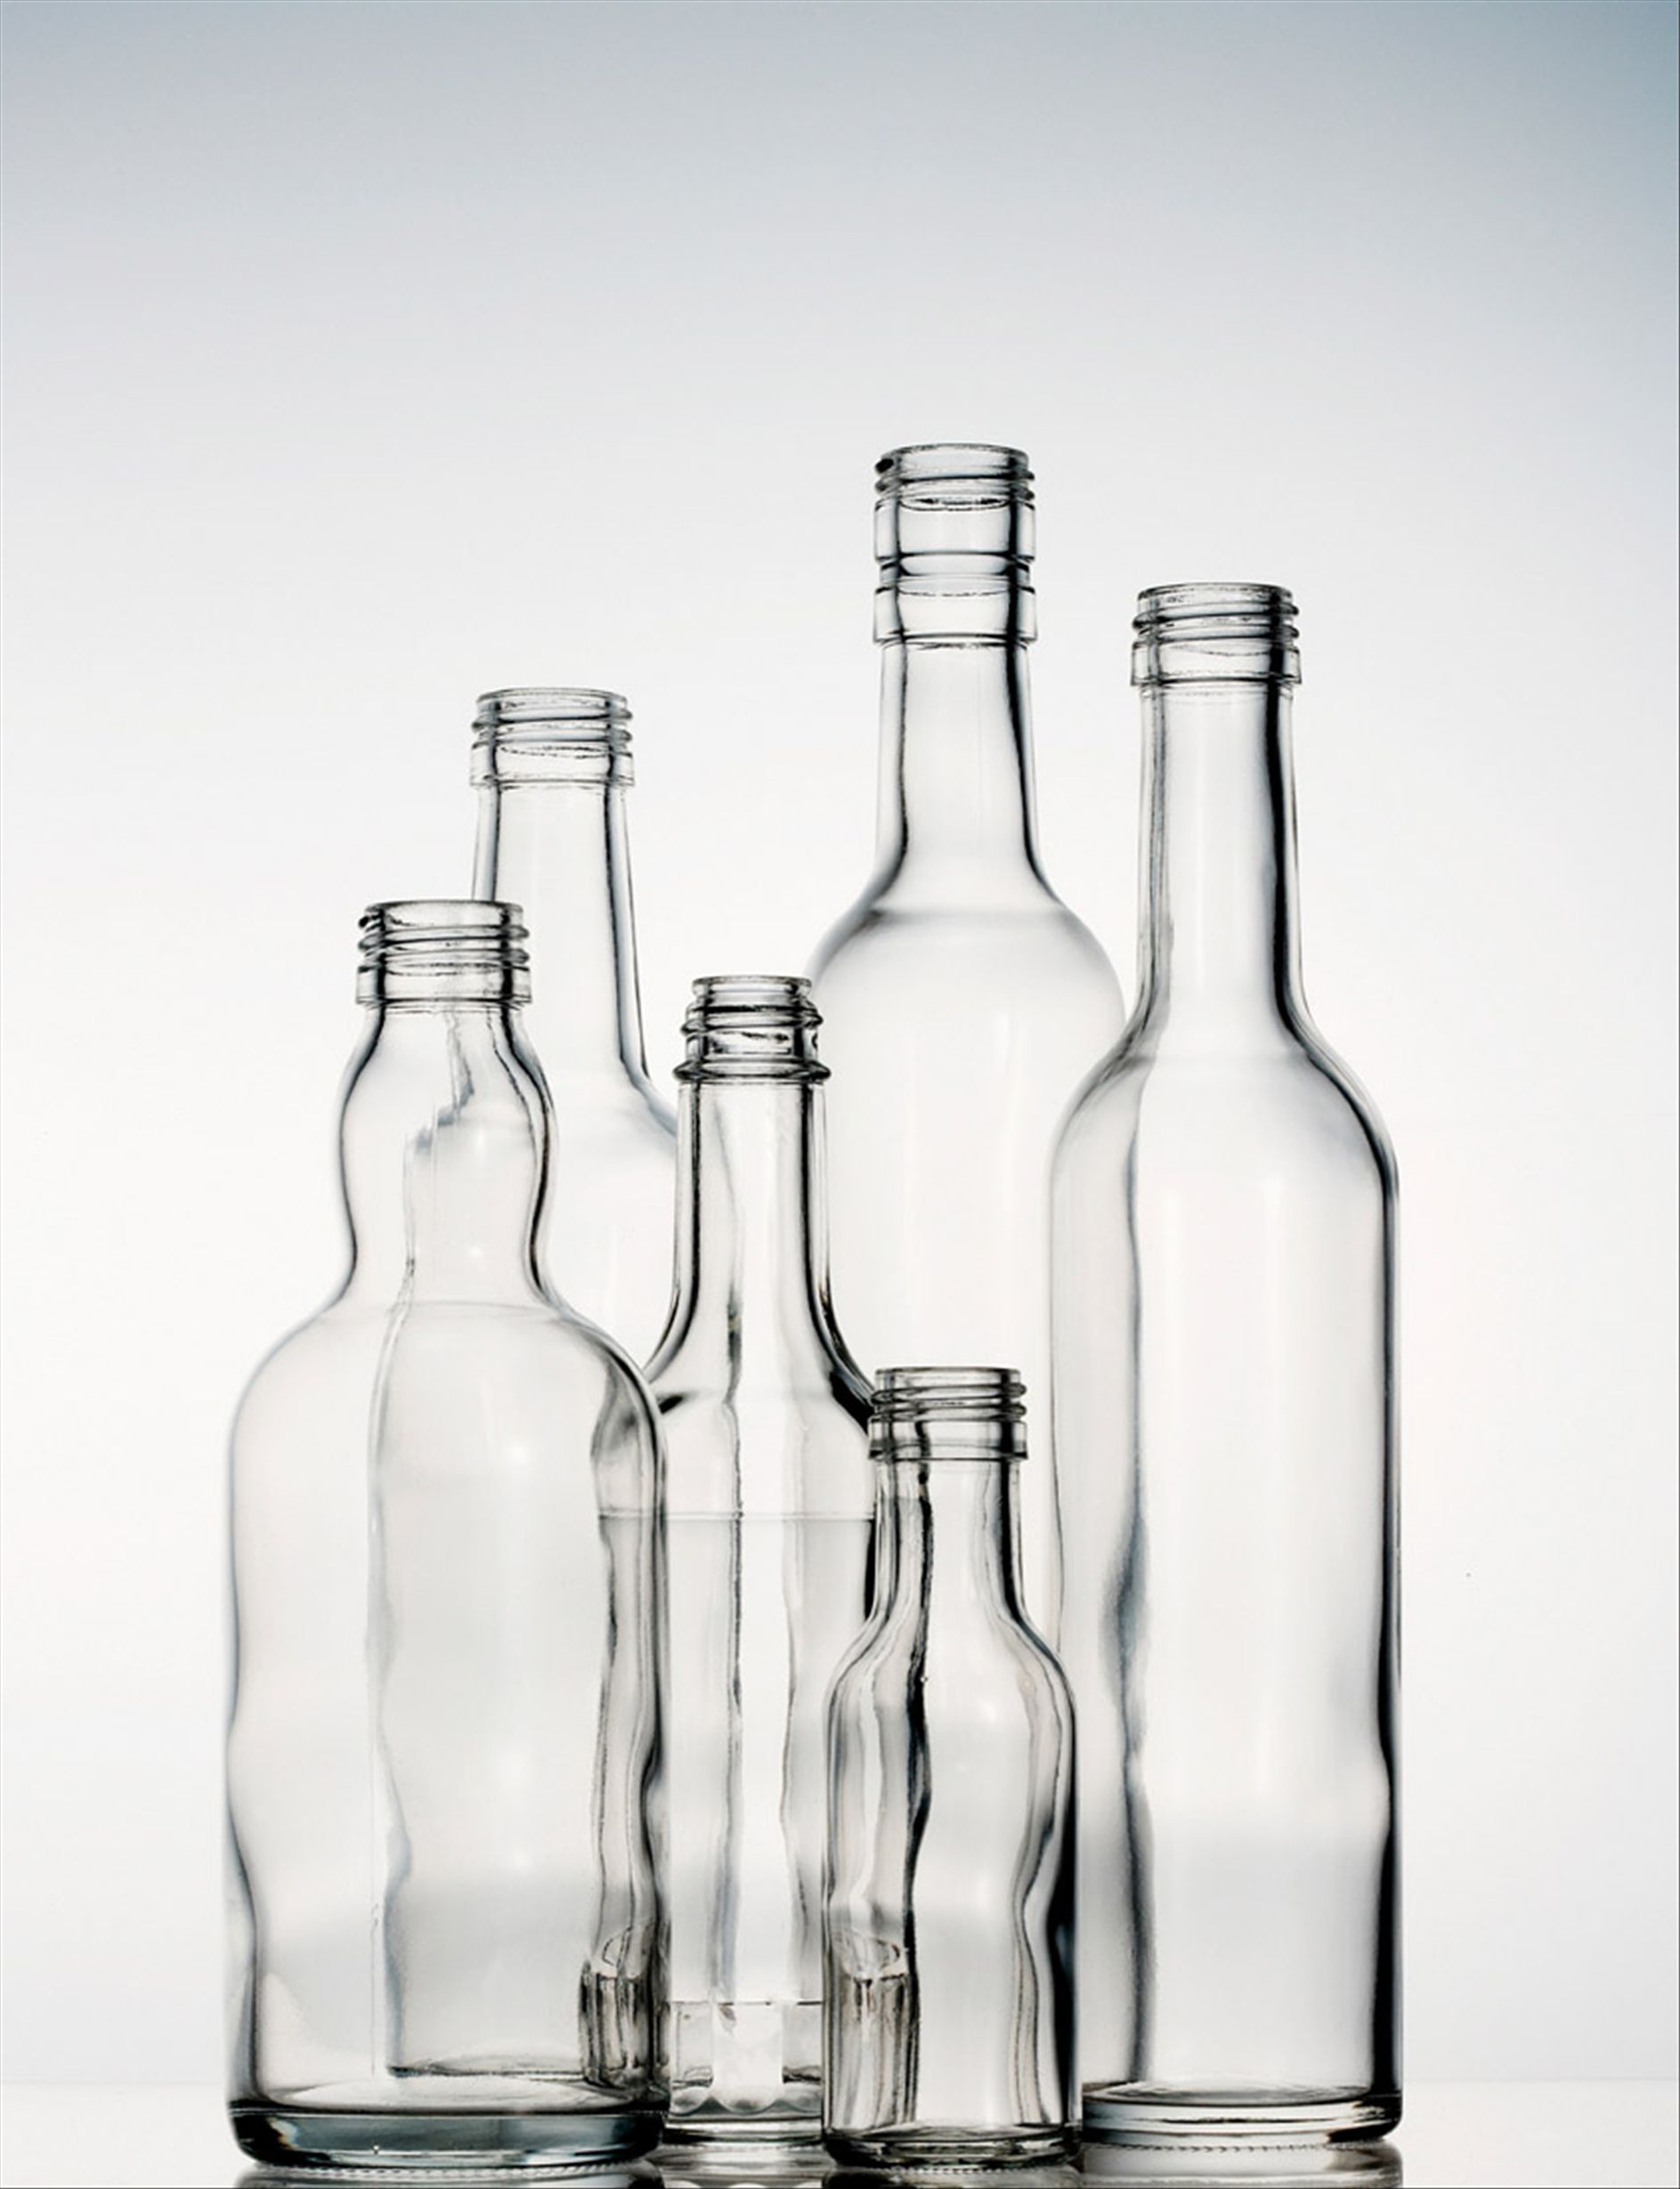 How to improve glass annealing for glass bottle manufacturers